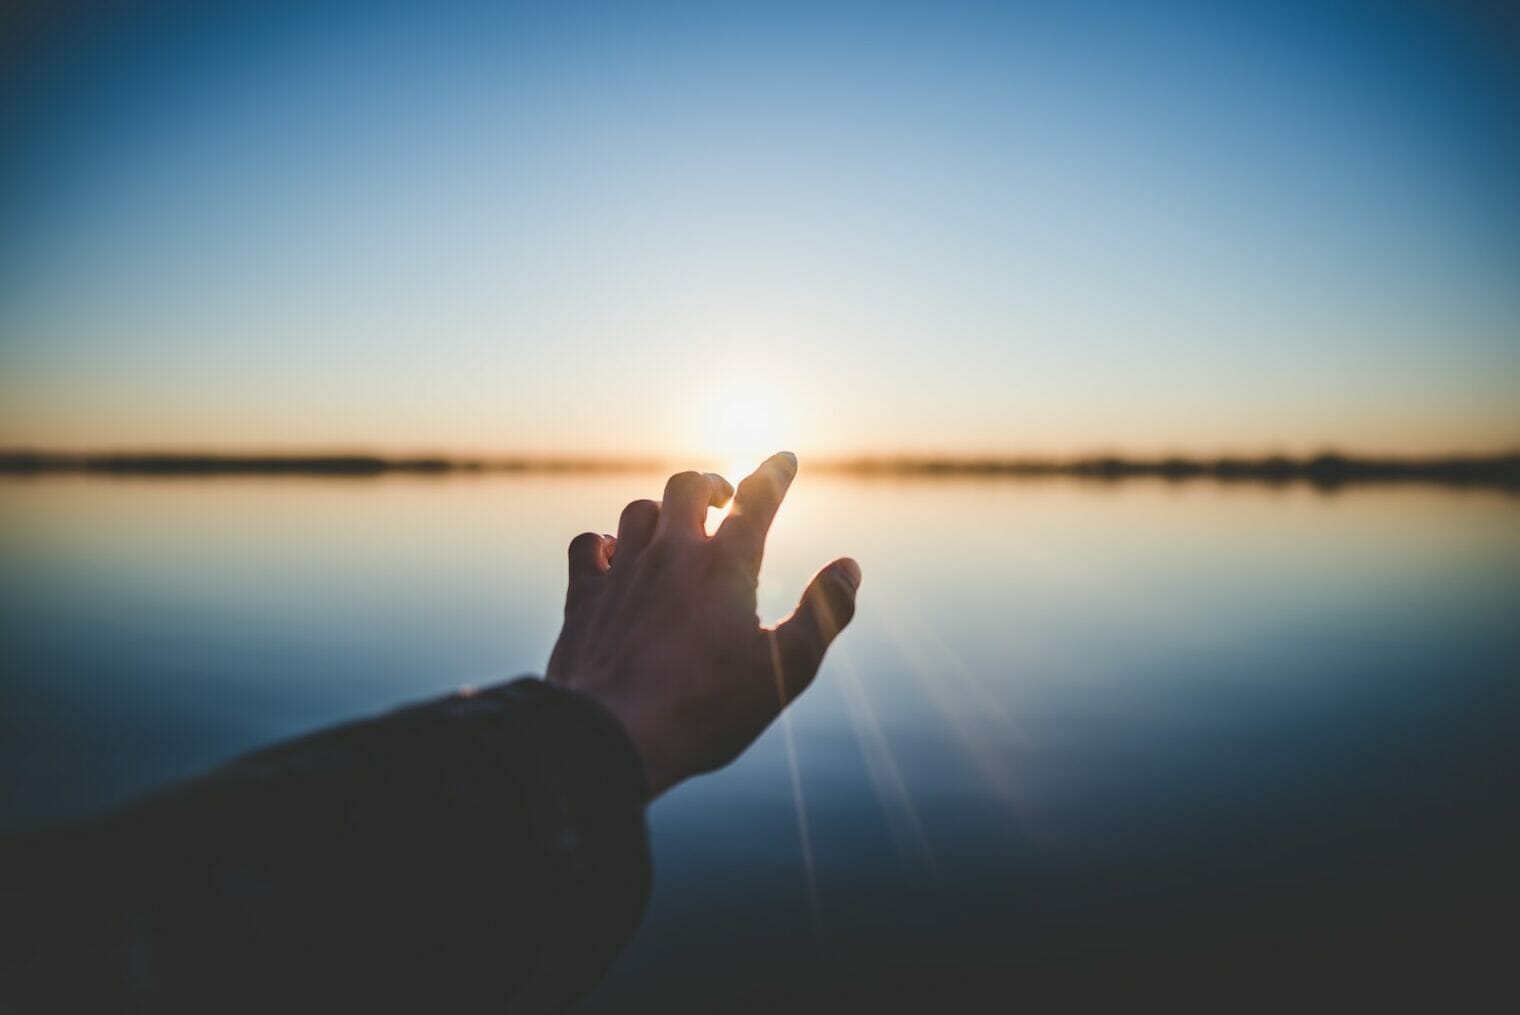 A person's hand extending towards the sun, symbolizing hope and youth wellness.